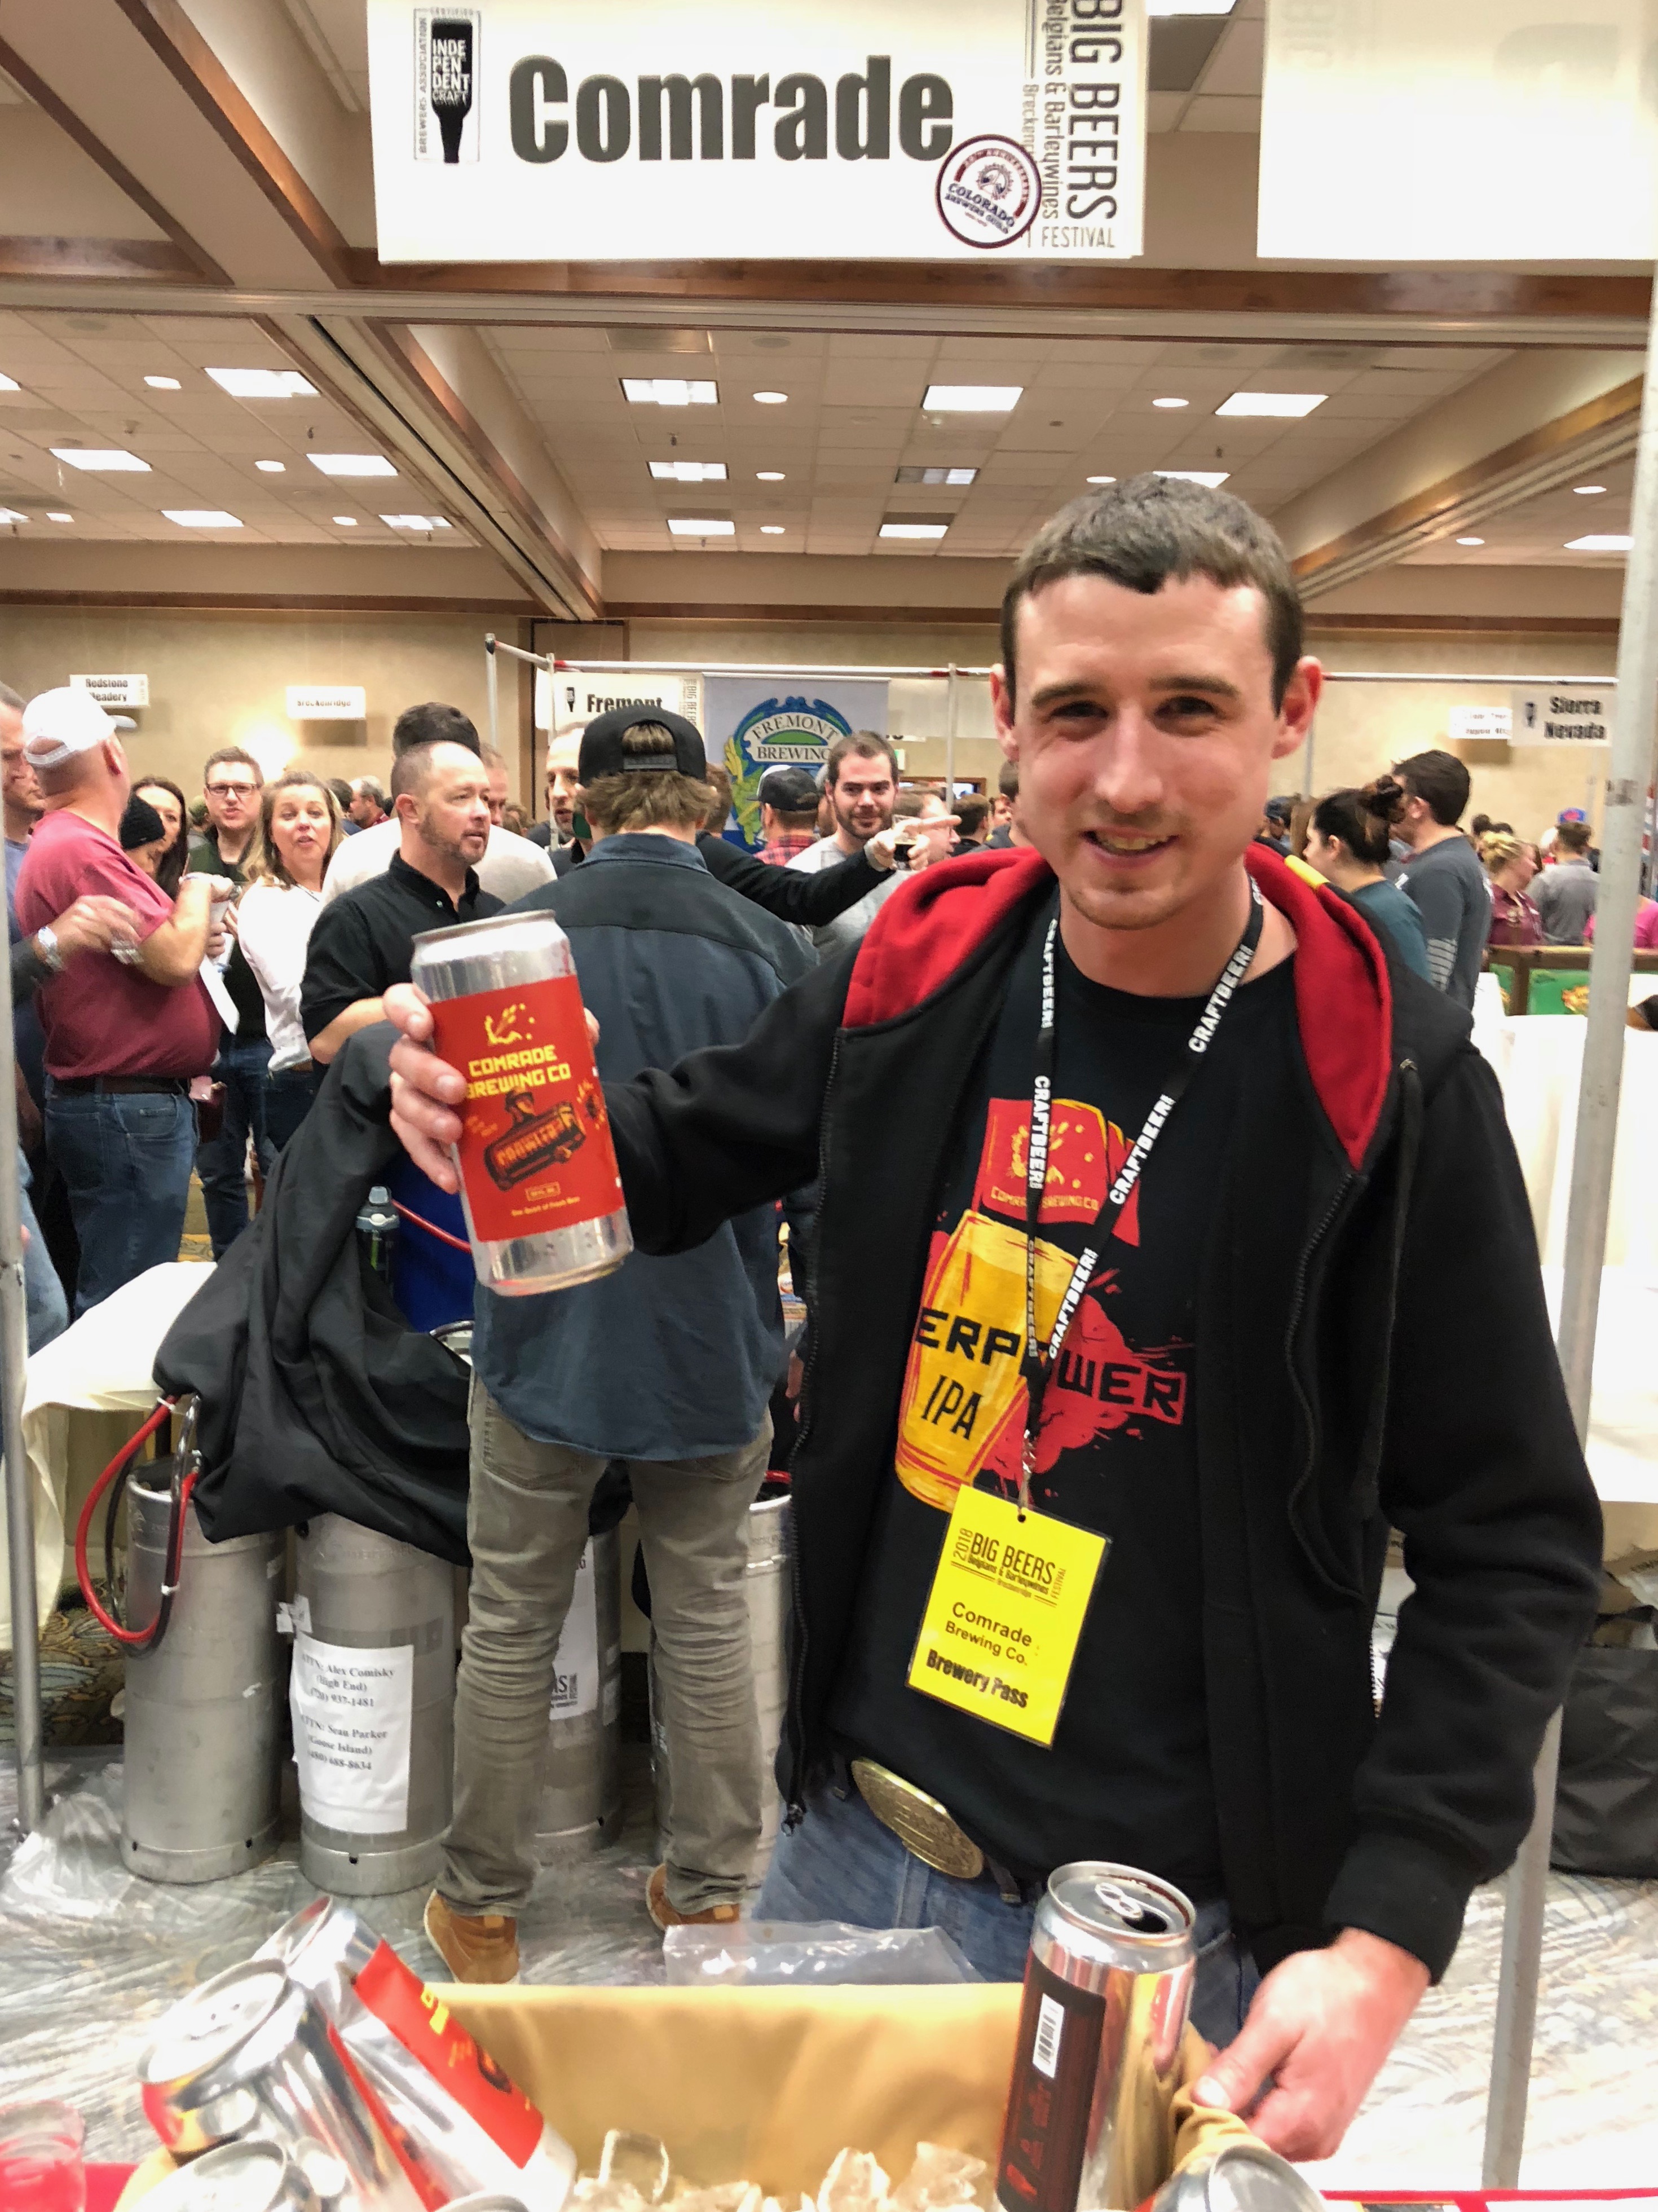 Denver's Comrade Brewing pouring at the 2018 Big Beers, Belgians & Barleywines Festival.